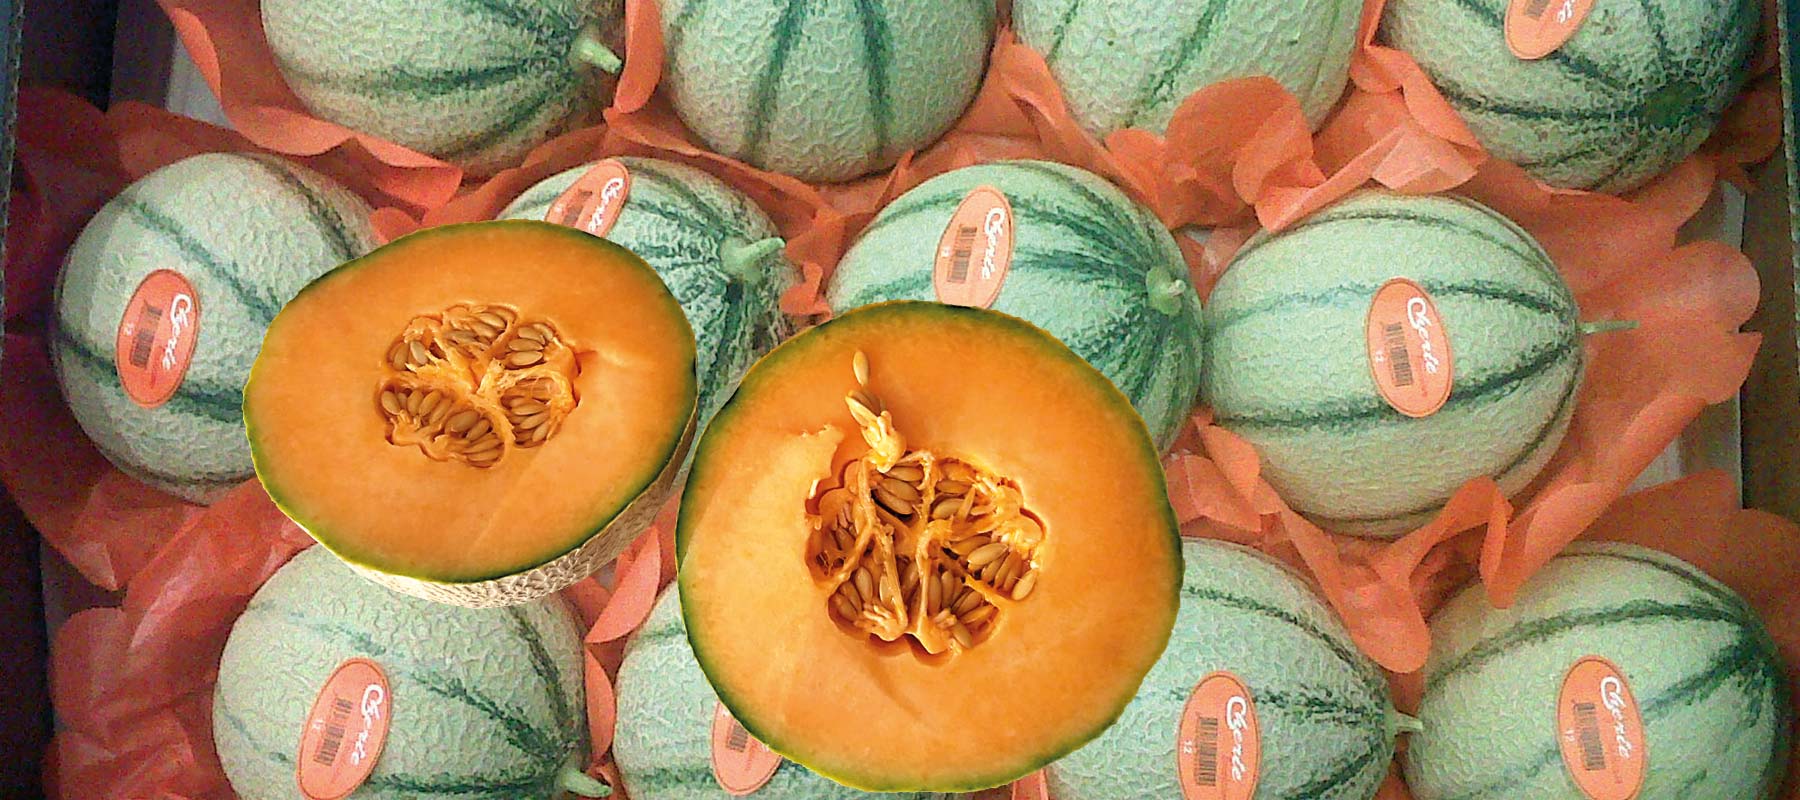 betzners charantaise melons